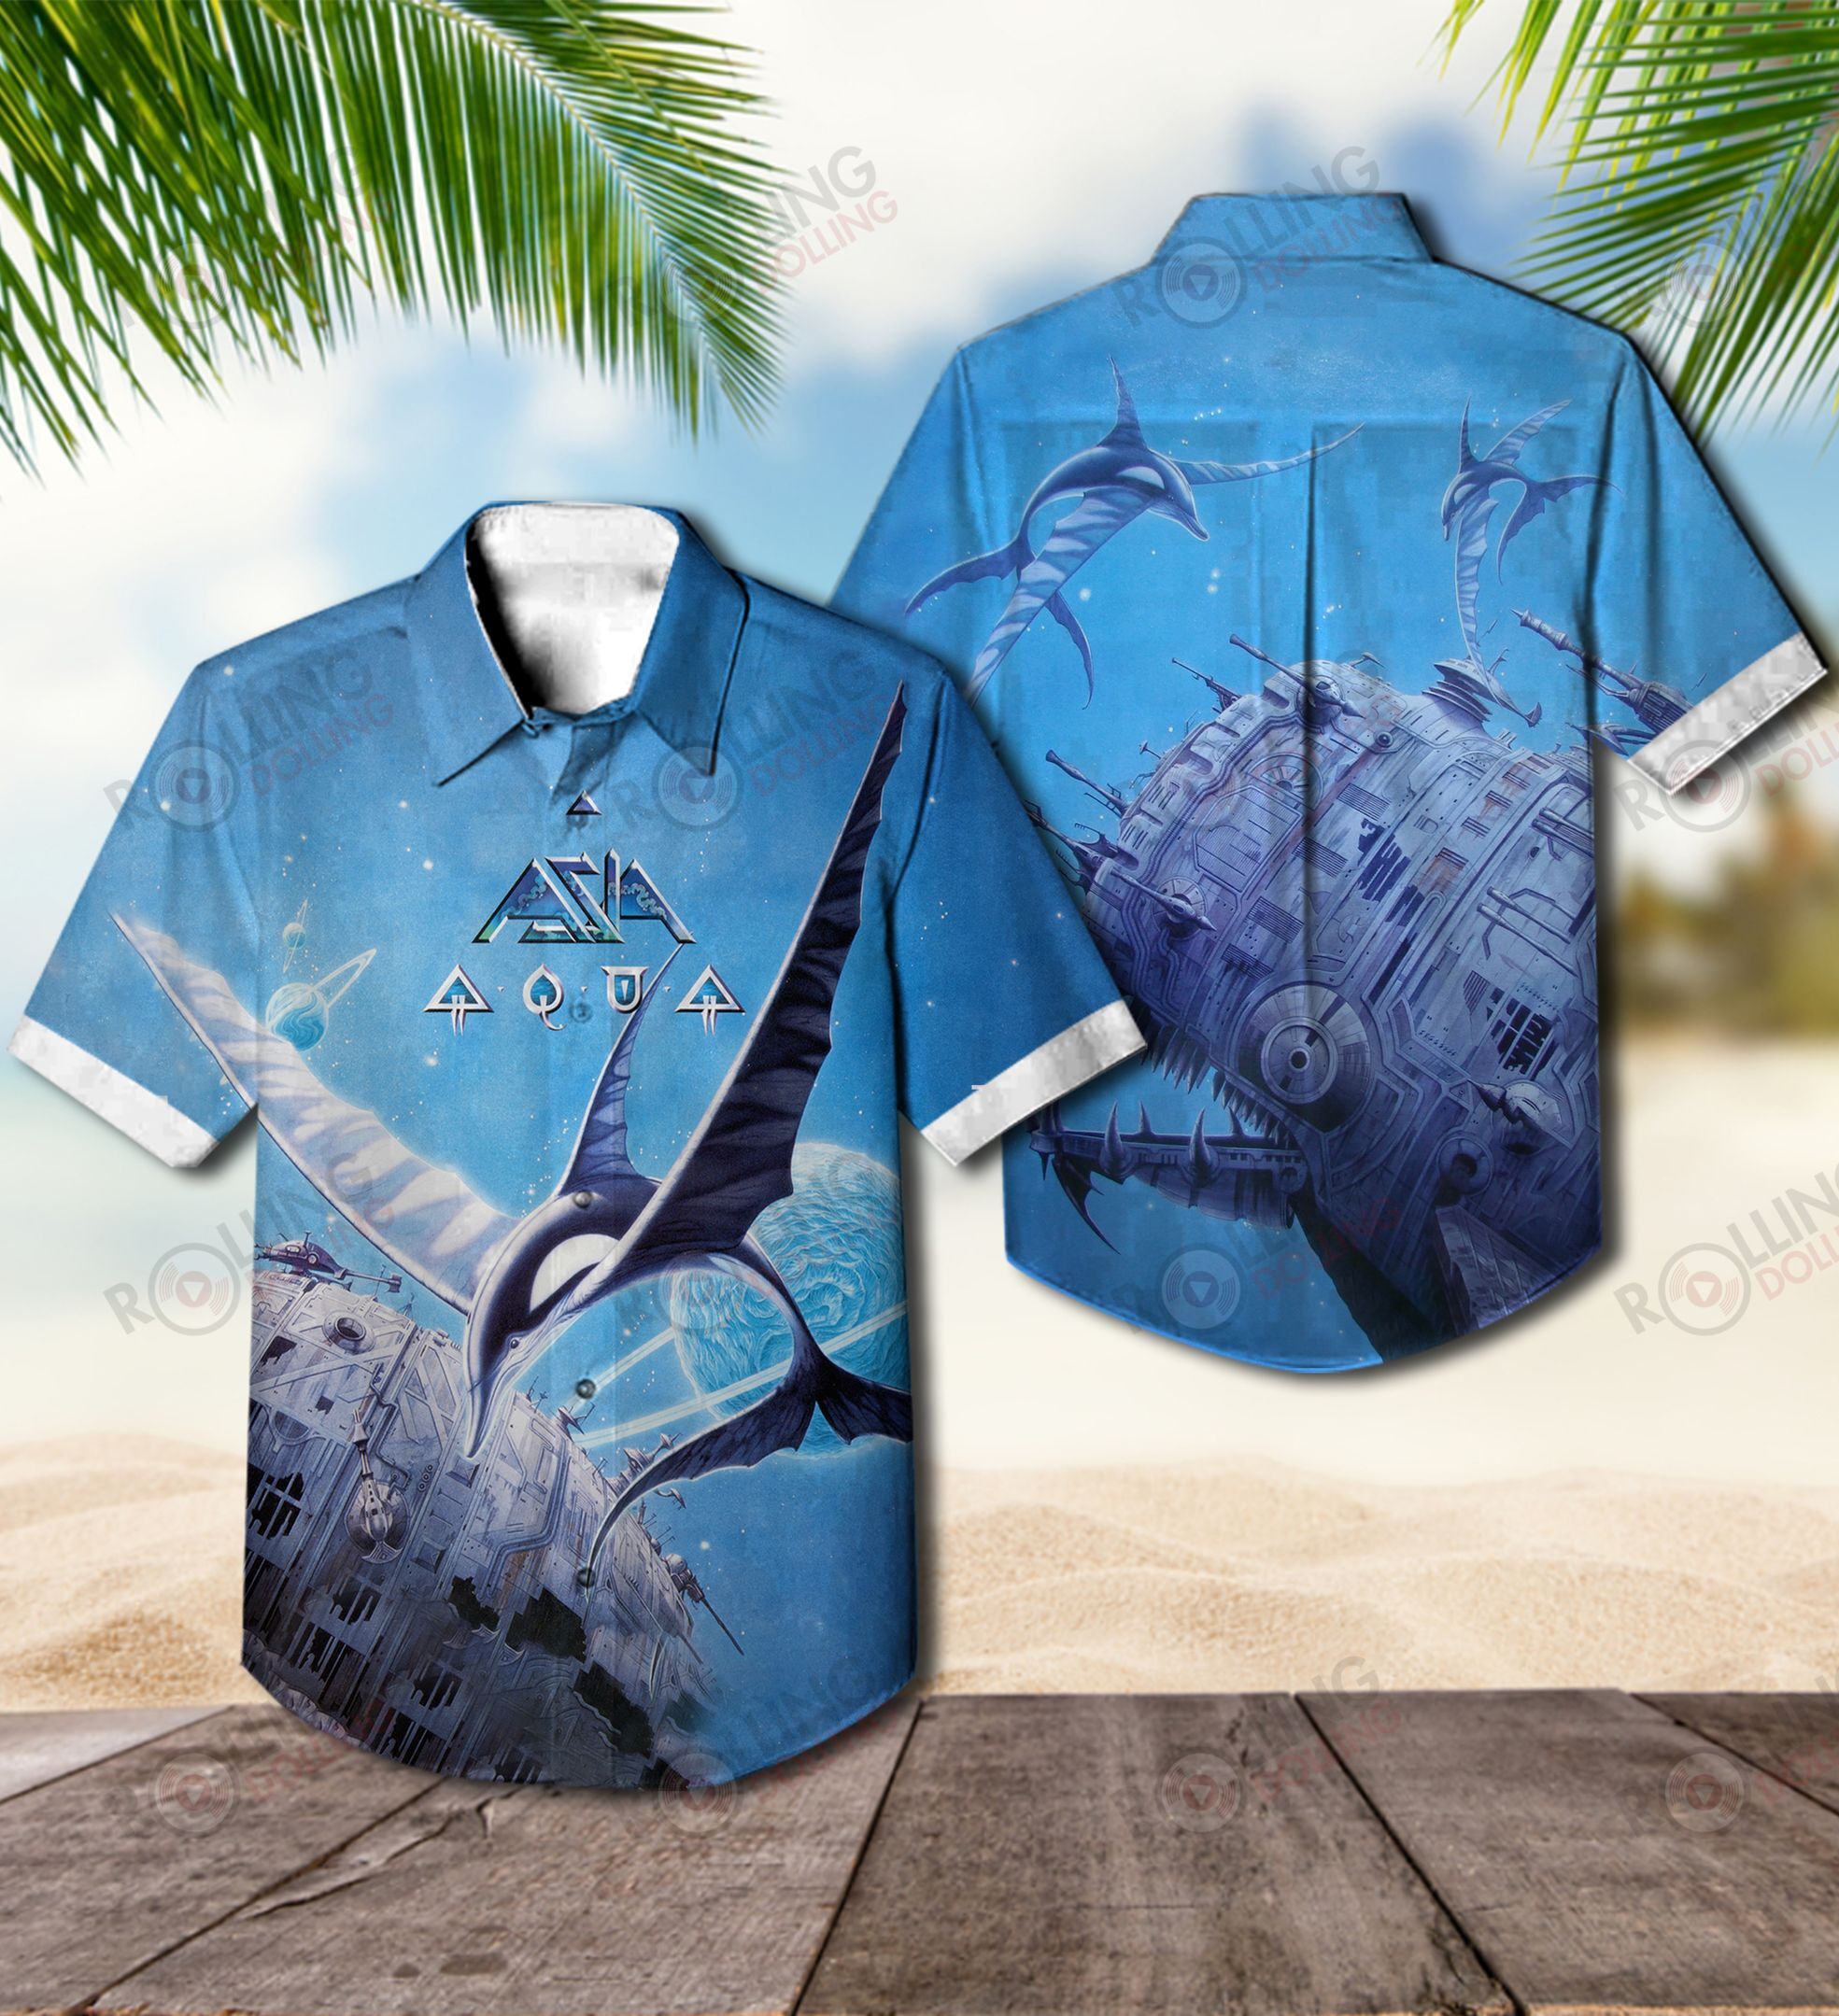 Check out these top 100+ Hawaiian shirt so cool for rock fans 391